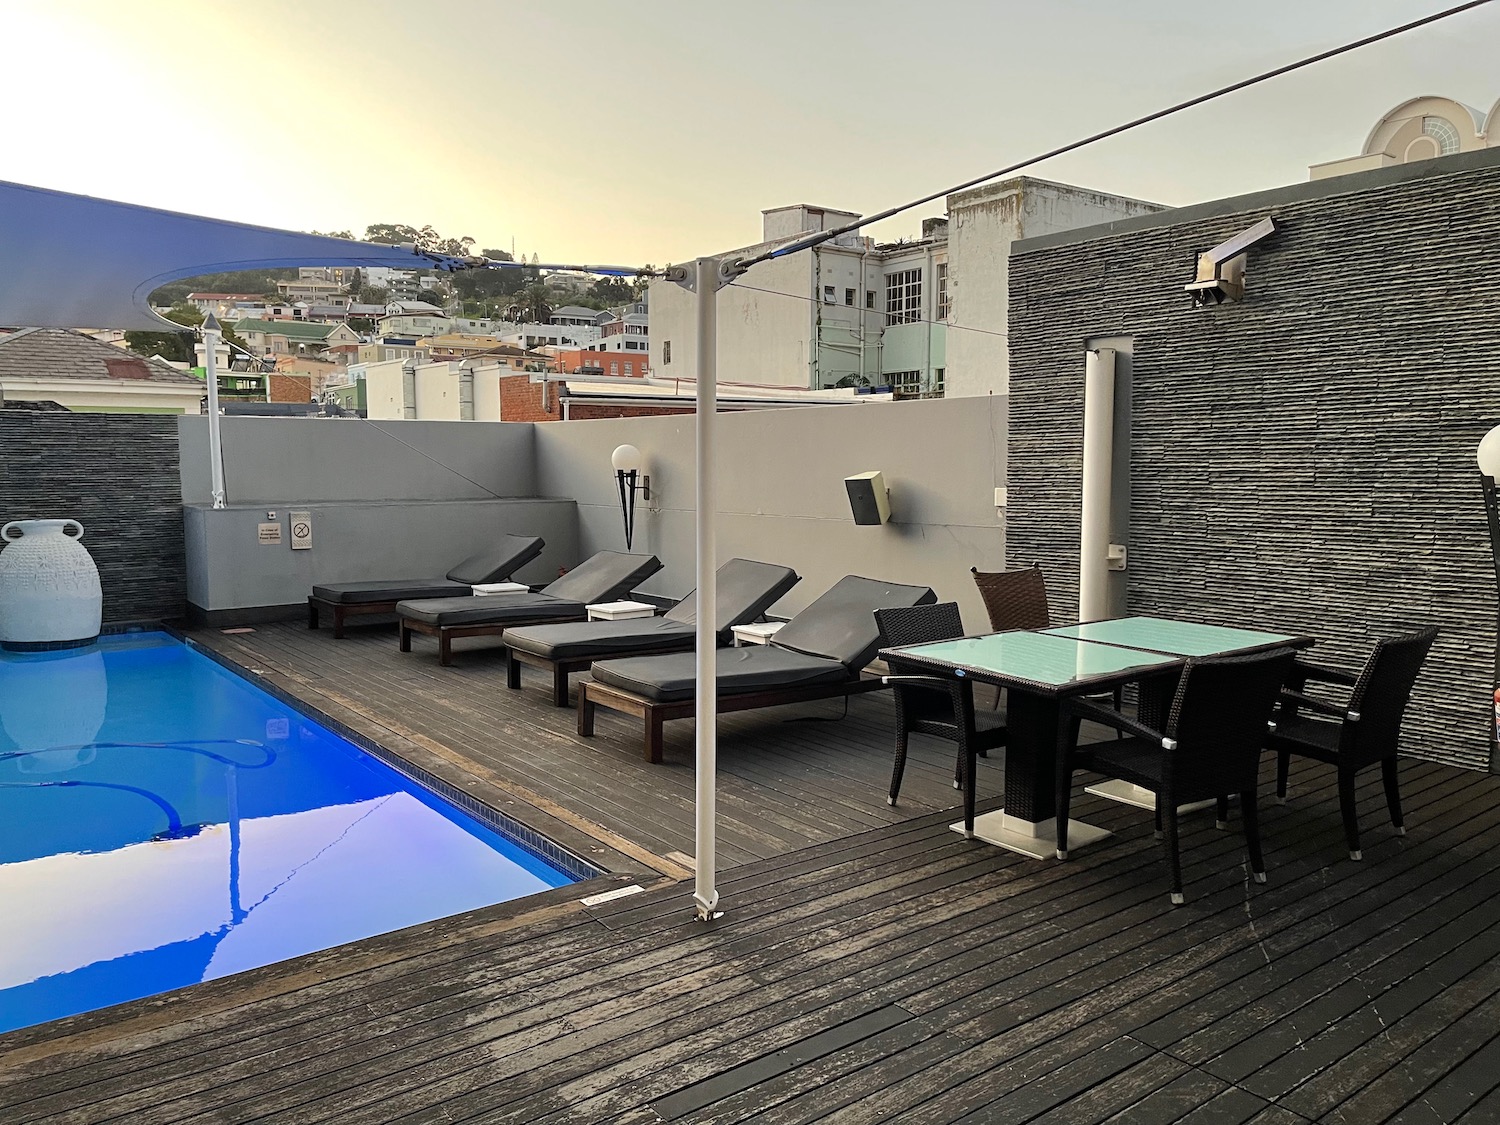 a deck with chairs and a pool on a rooftop